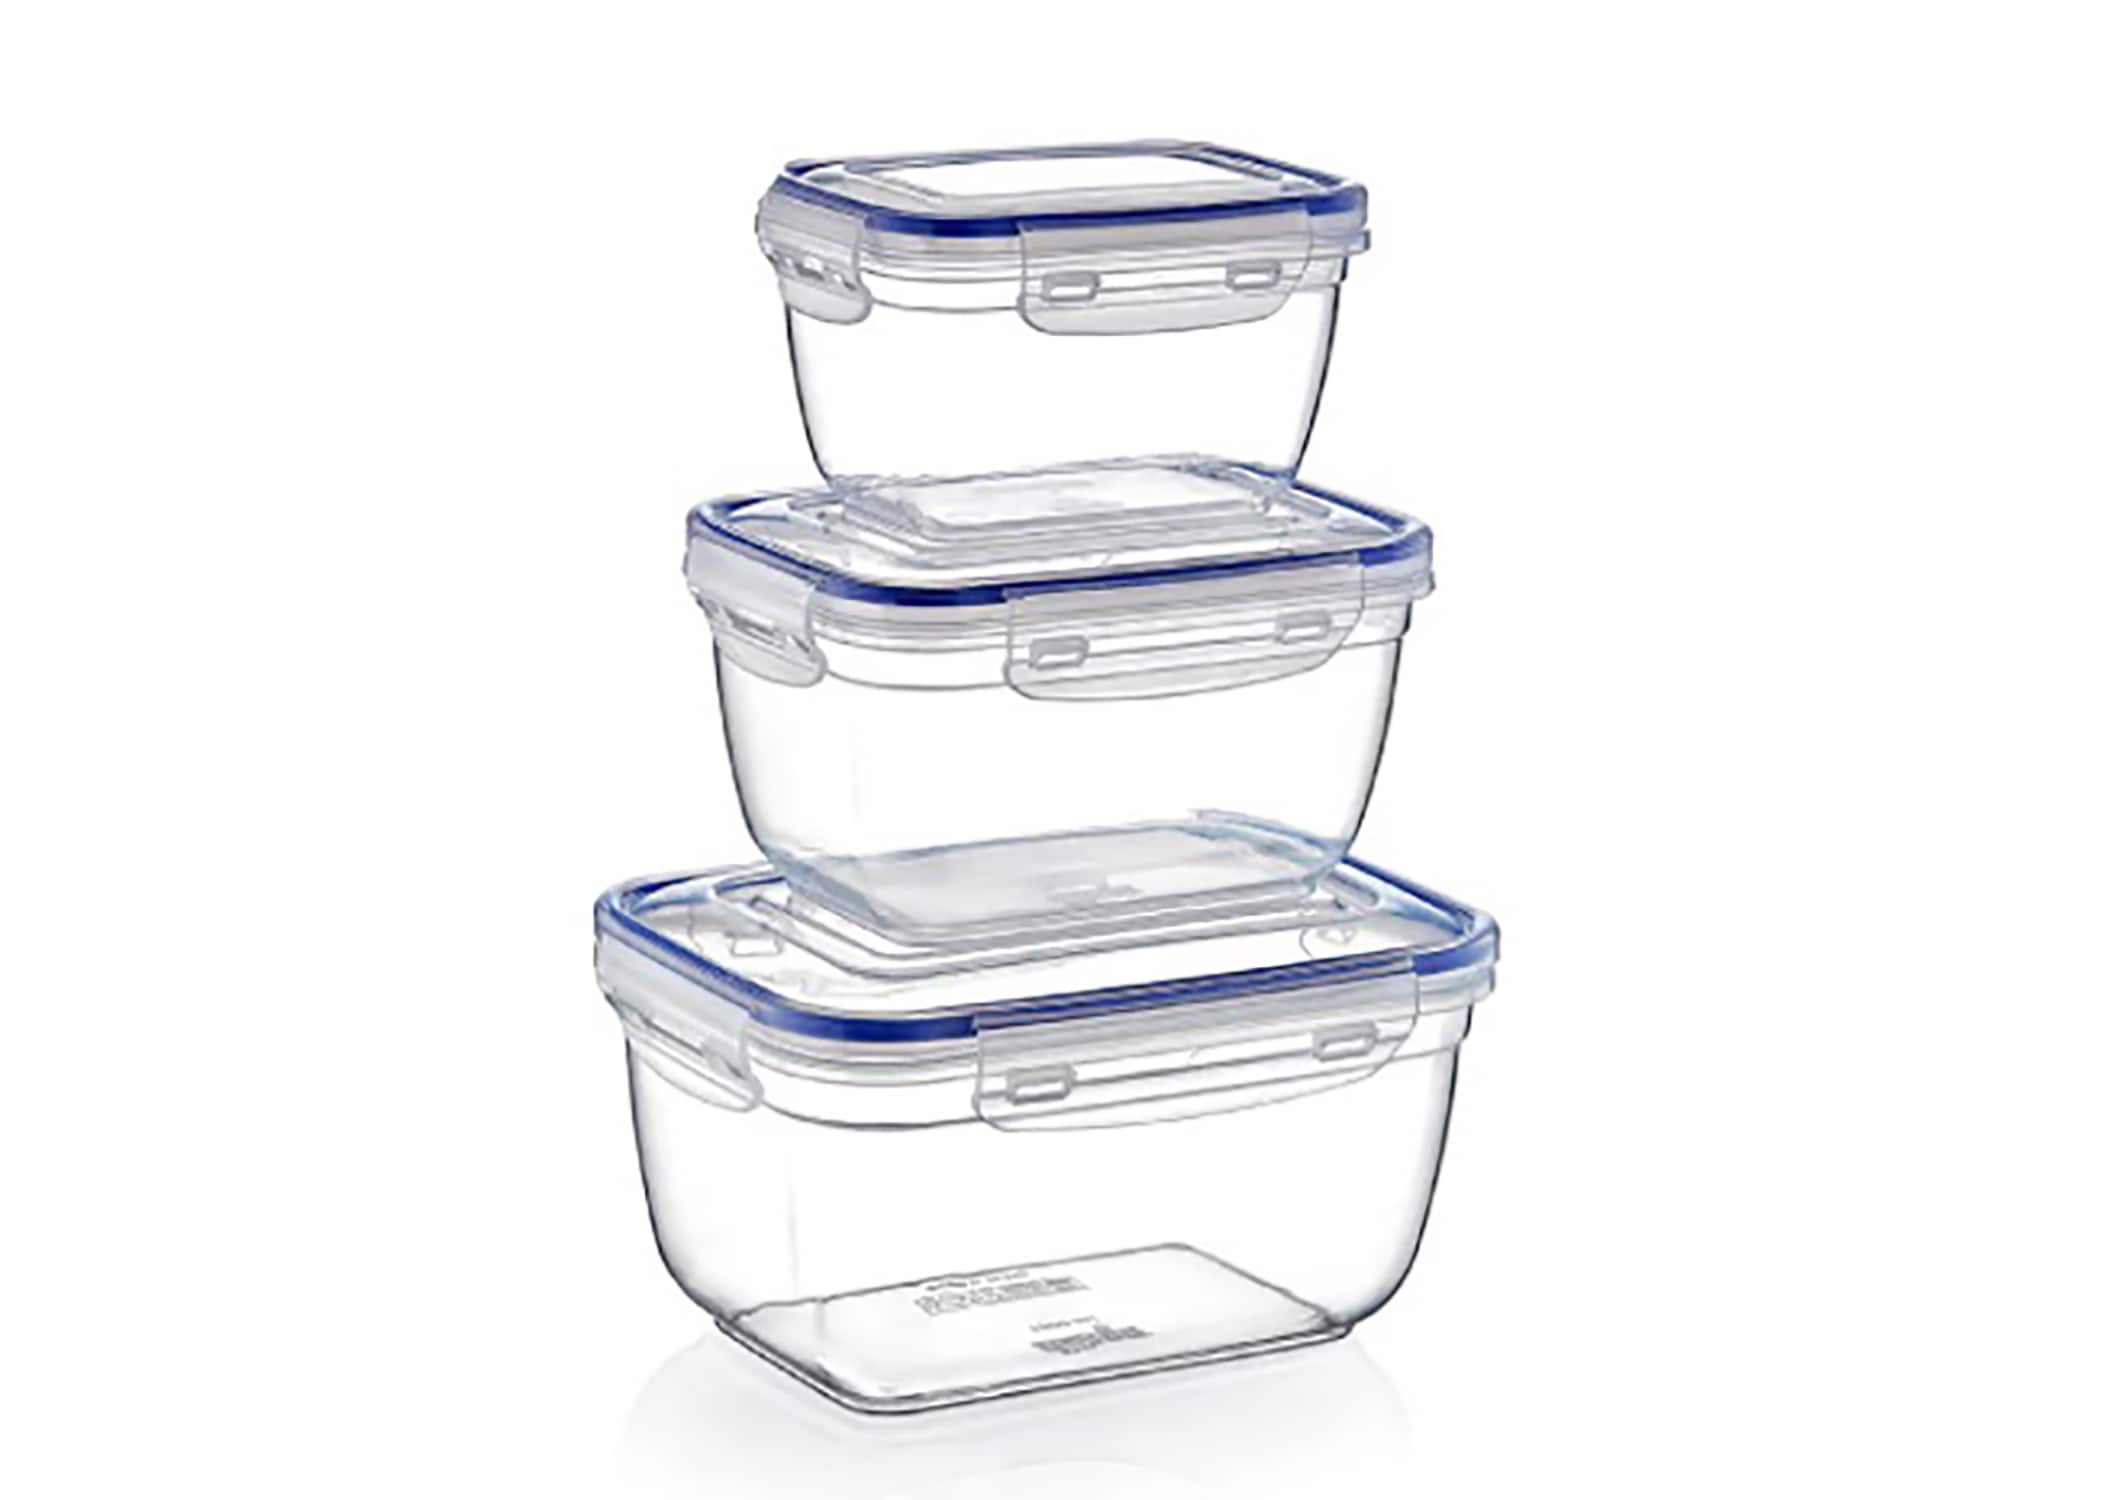 Superio Large Plastic Food Storage Container, with Airtight Lid for Pantry-  (2.5 Quart) Microwave, Dishwasher and Freezer Safe, BPA Free Plastic 